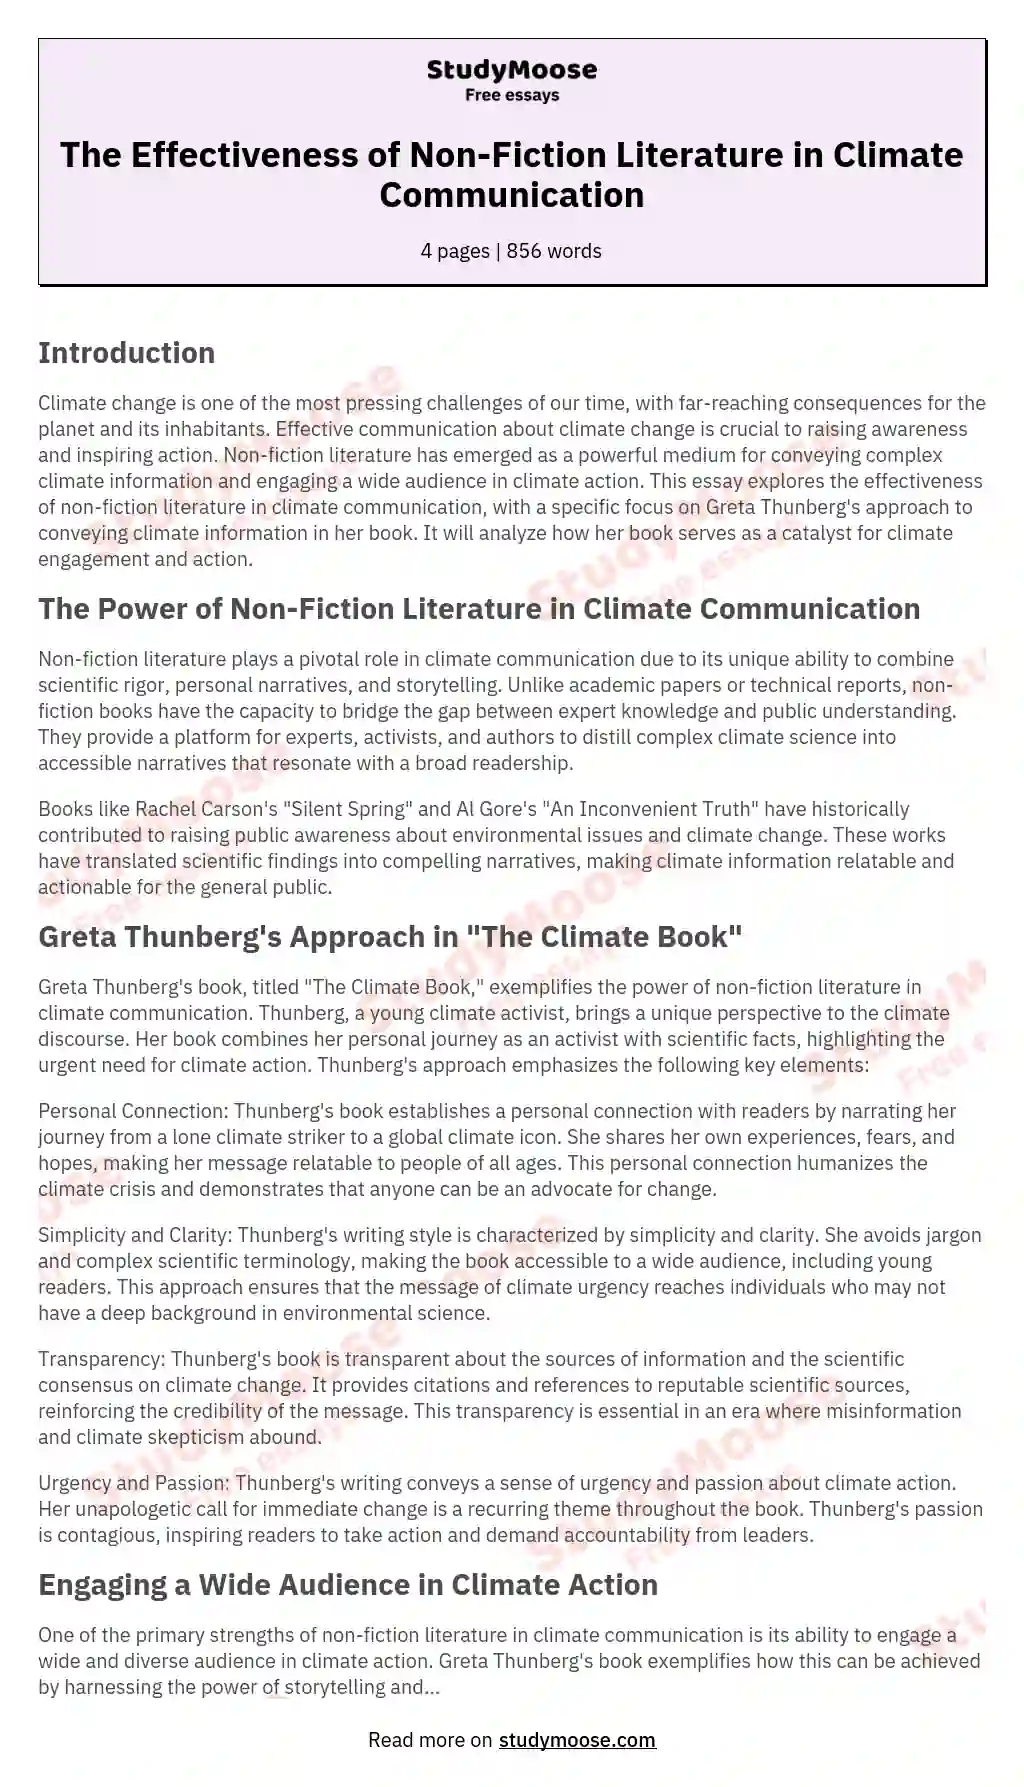 The Effectiveness of Non-Fiction Literature in Climate Communication essay